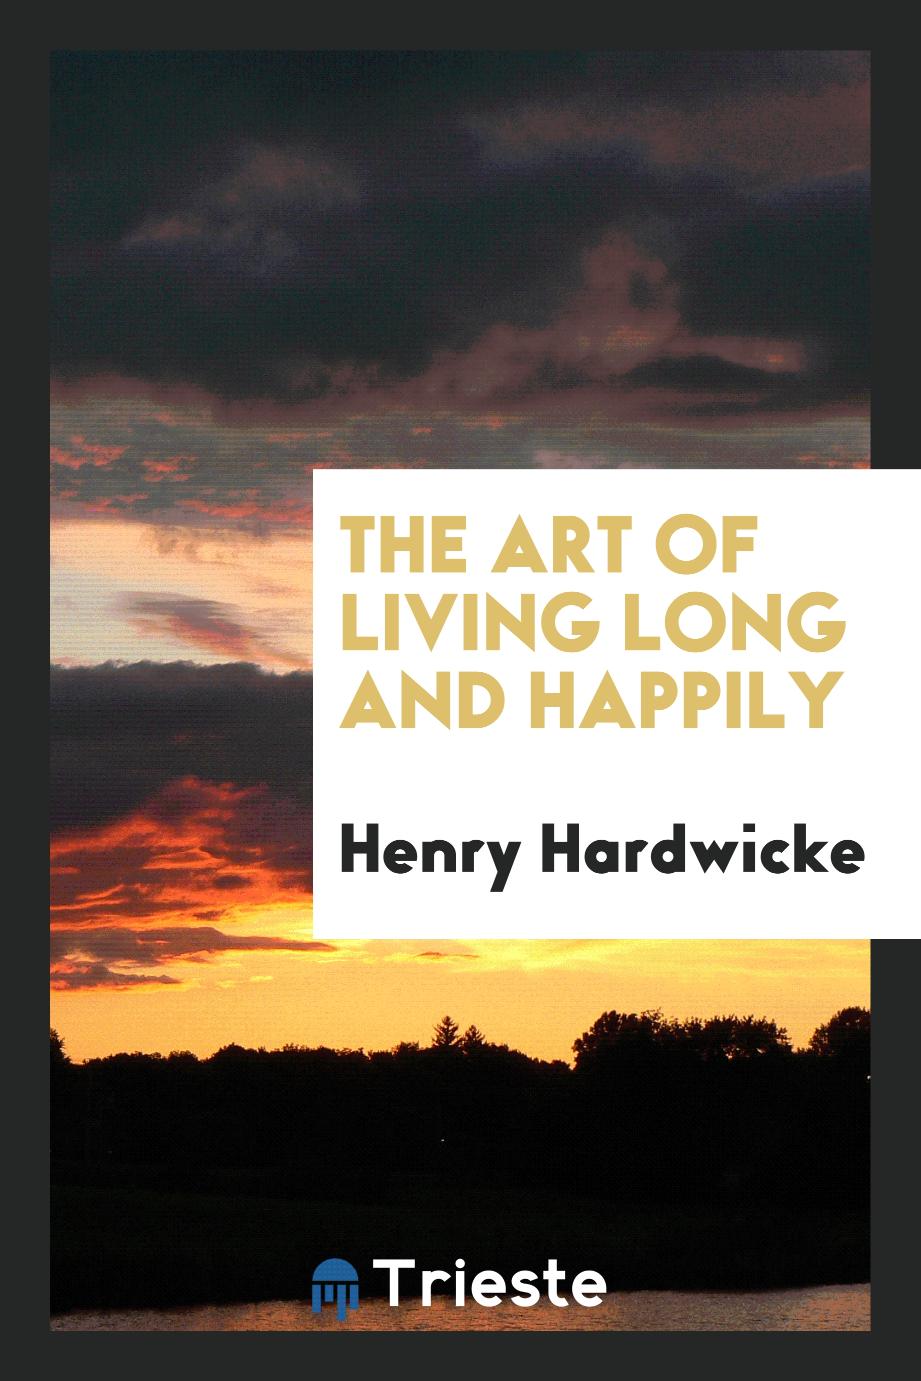 The Art of Living Long and Happily